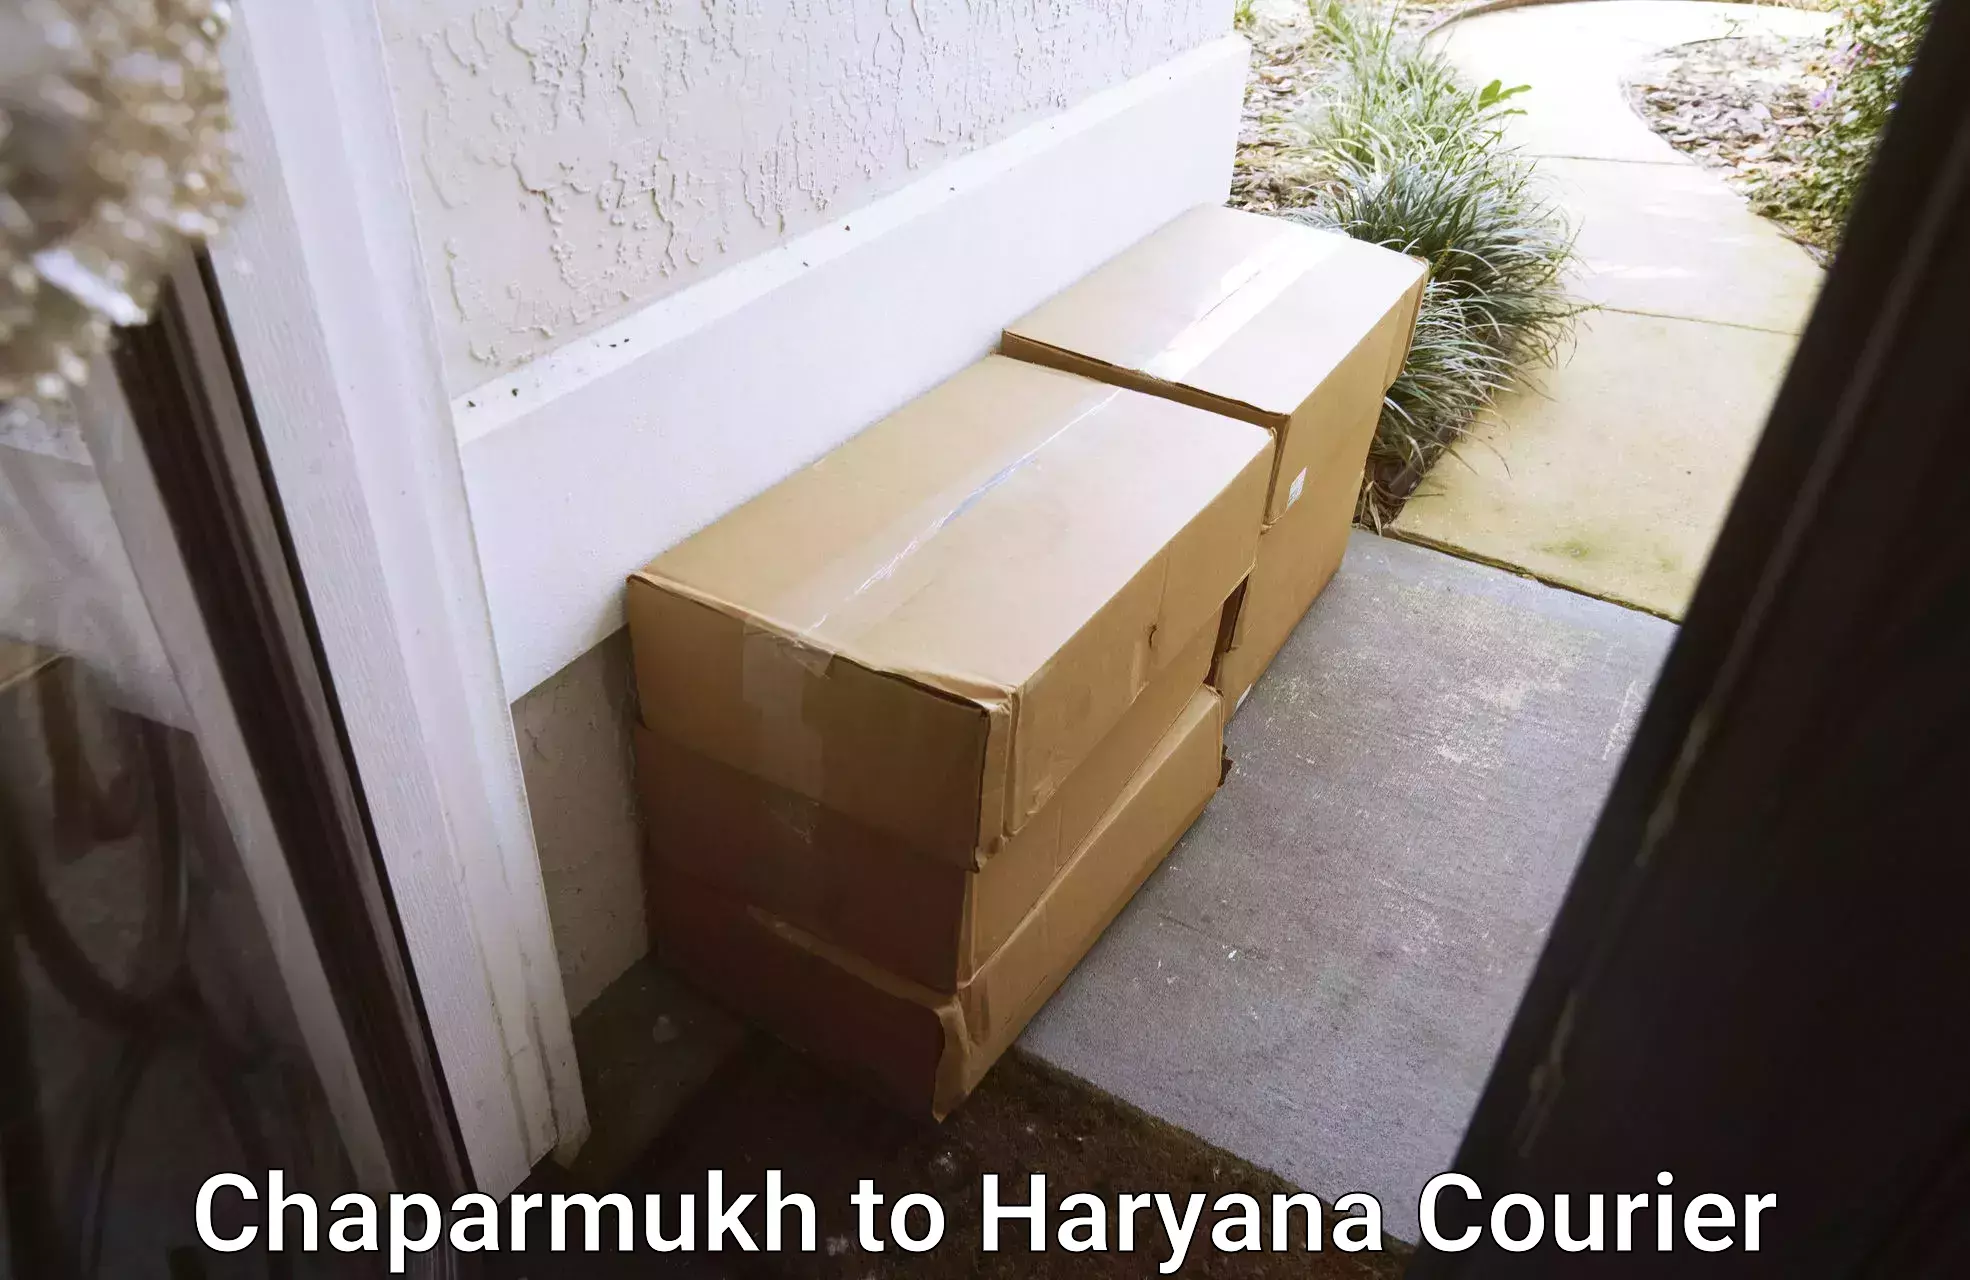 Advanced courier platforms Chaparmukh to NCR Haryana